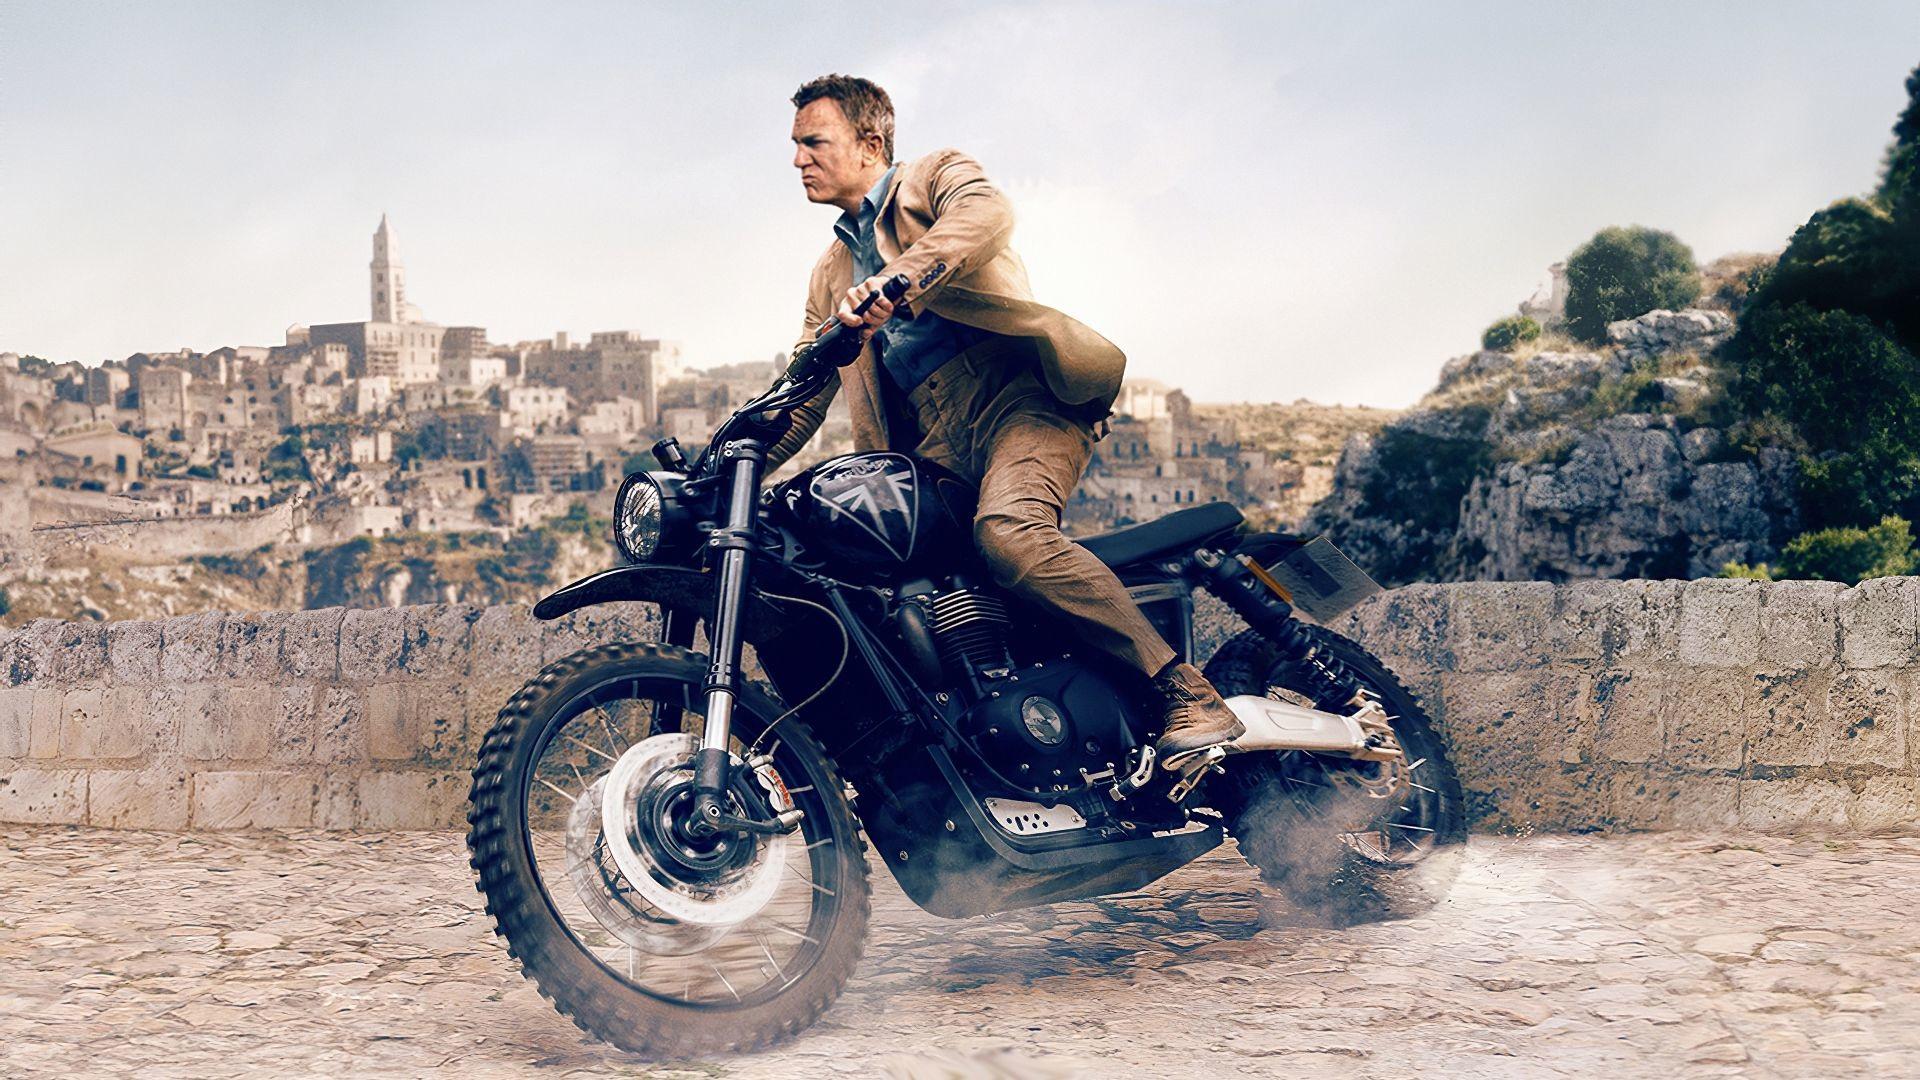 Ride Like James Bond 007 - No Time To Die - Triumph Motorcycle